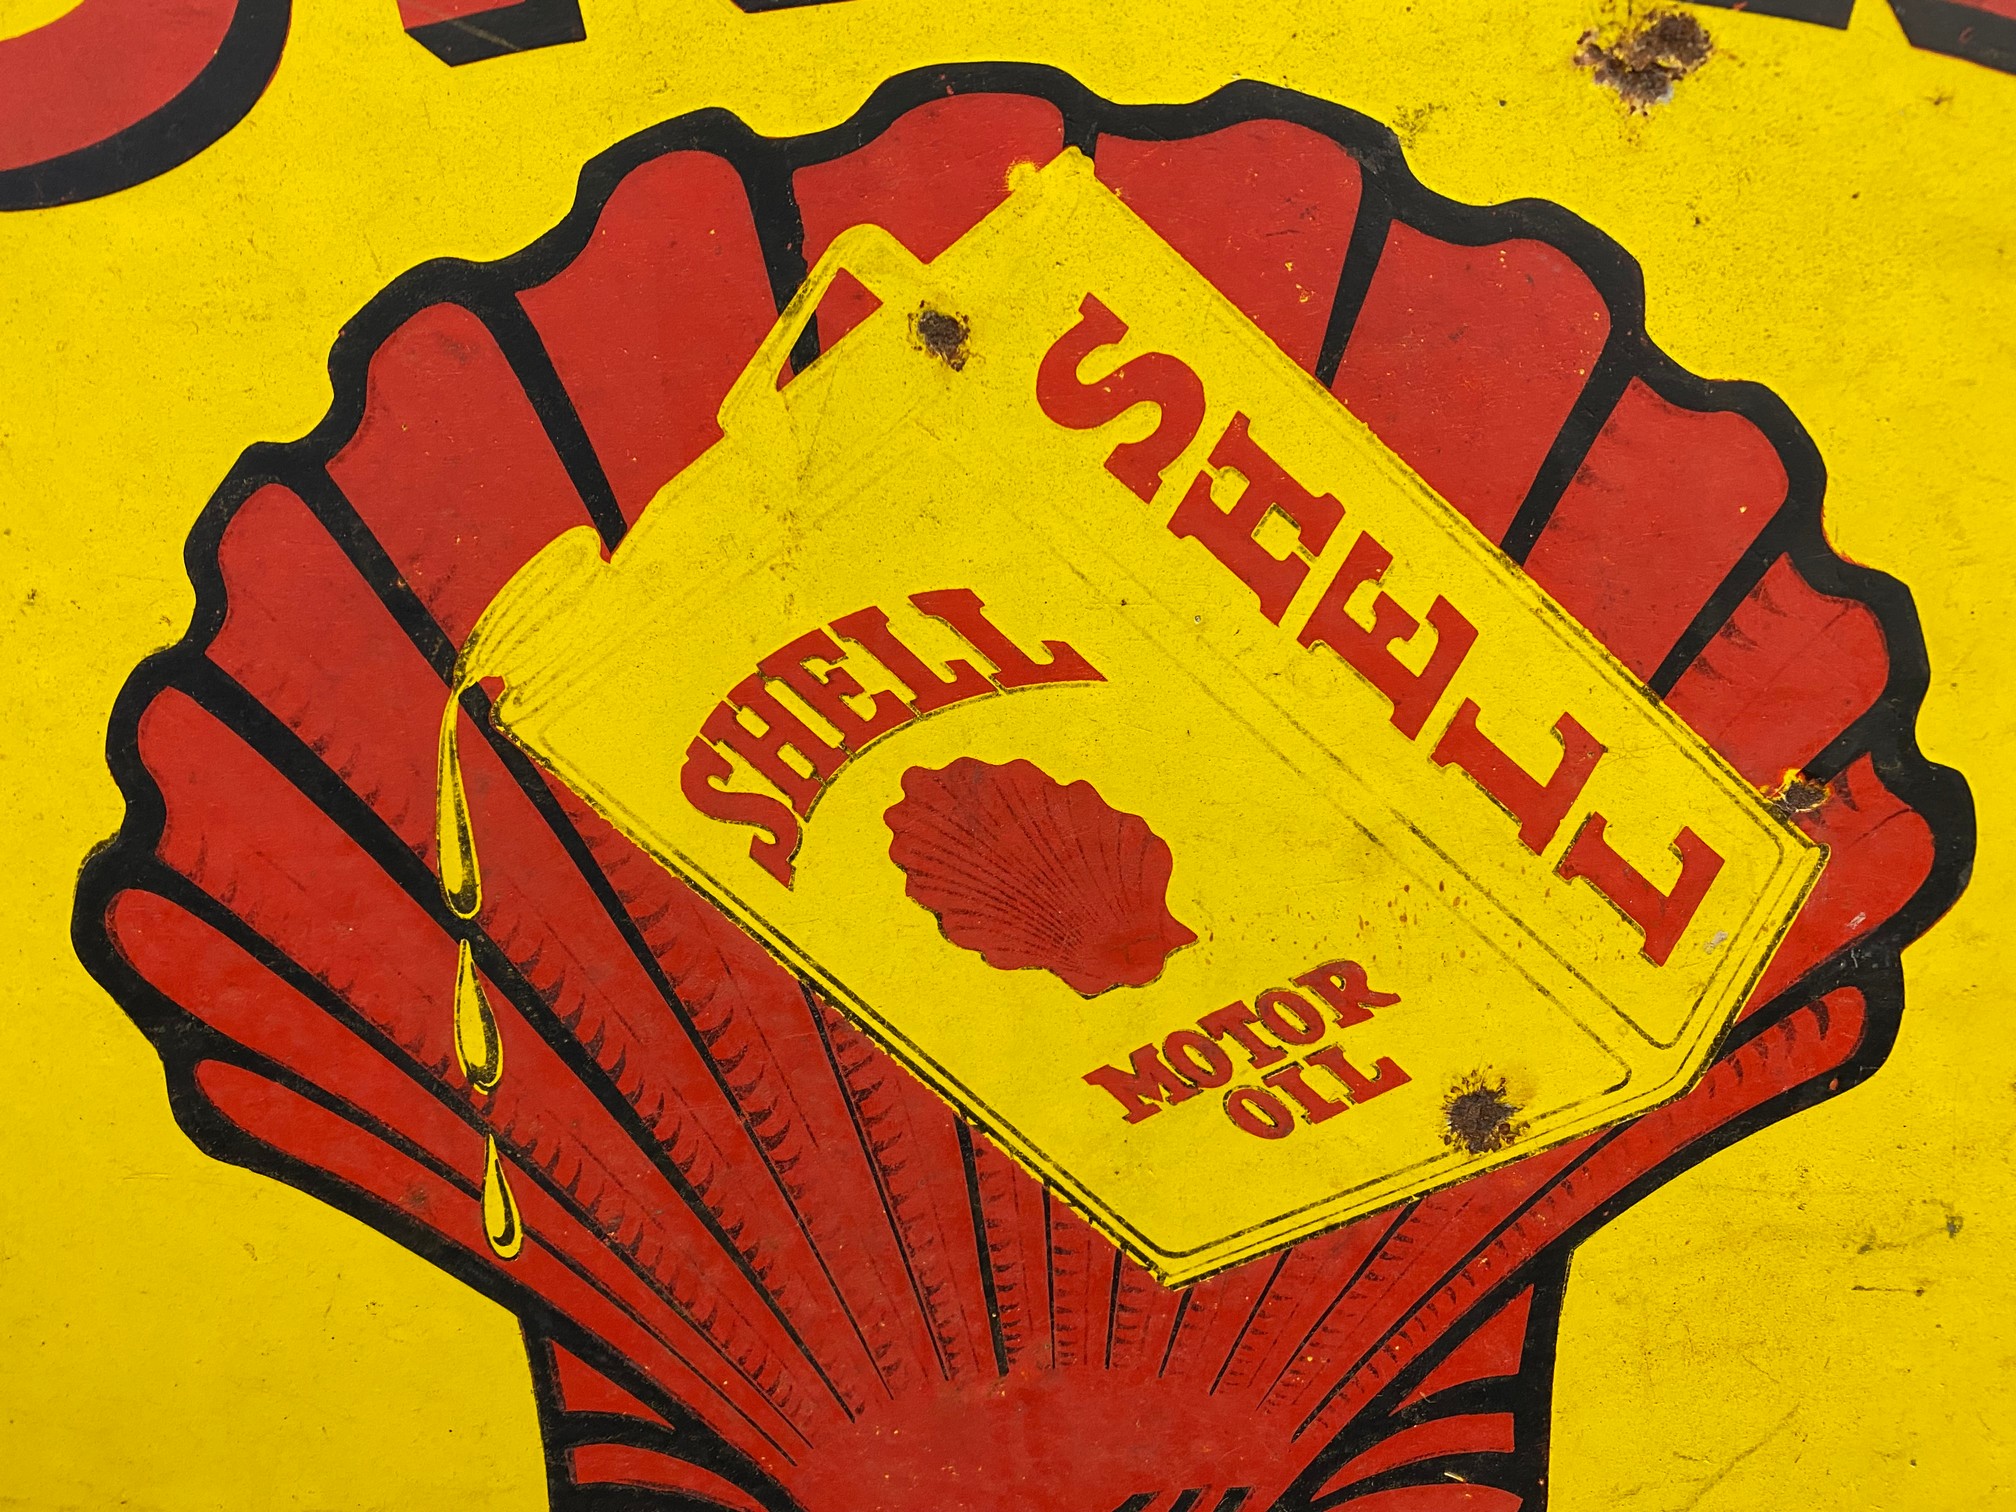 A Shell Motor Oil enamel sign with central dripping can image against a clam motif, 18 x 18". - Image 3 of 5